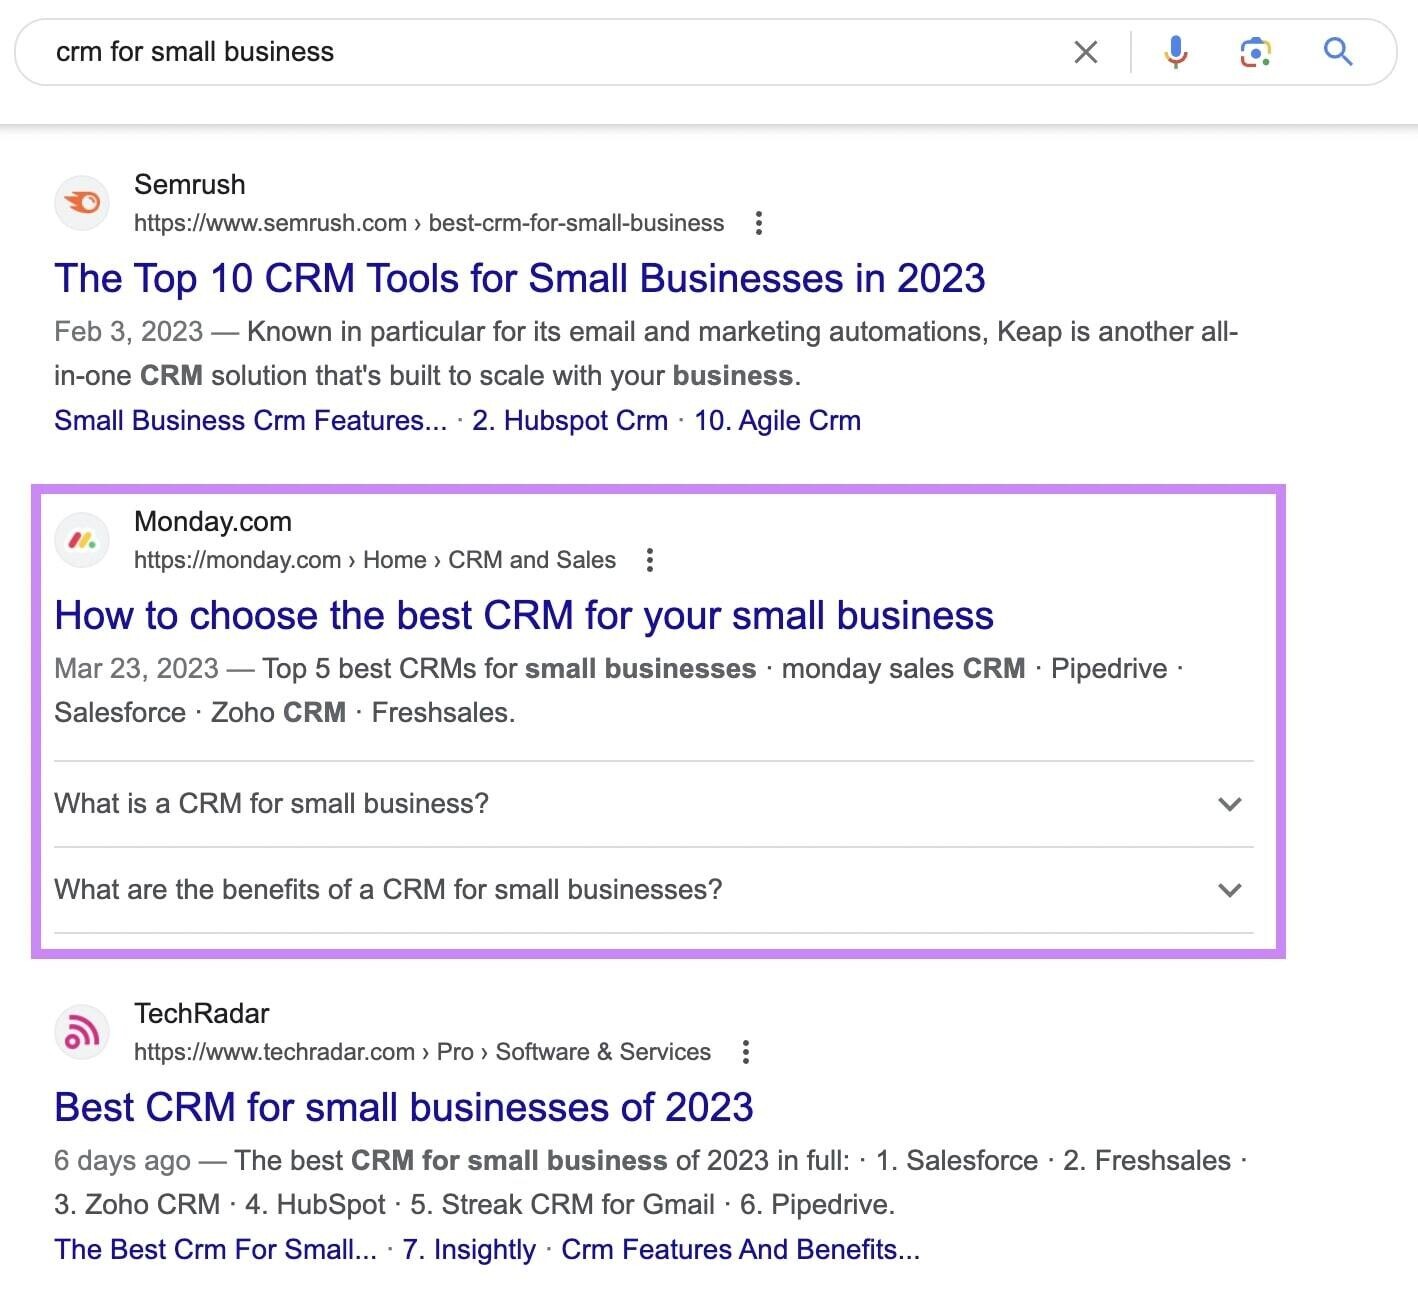 organic result from Monday.com for “CRM for small business” search